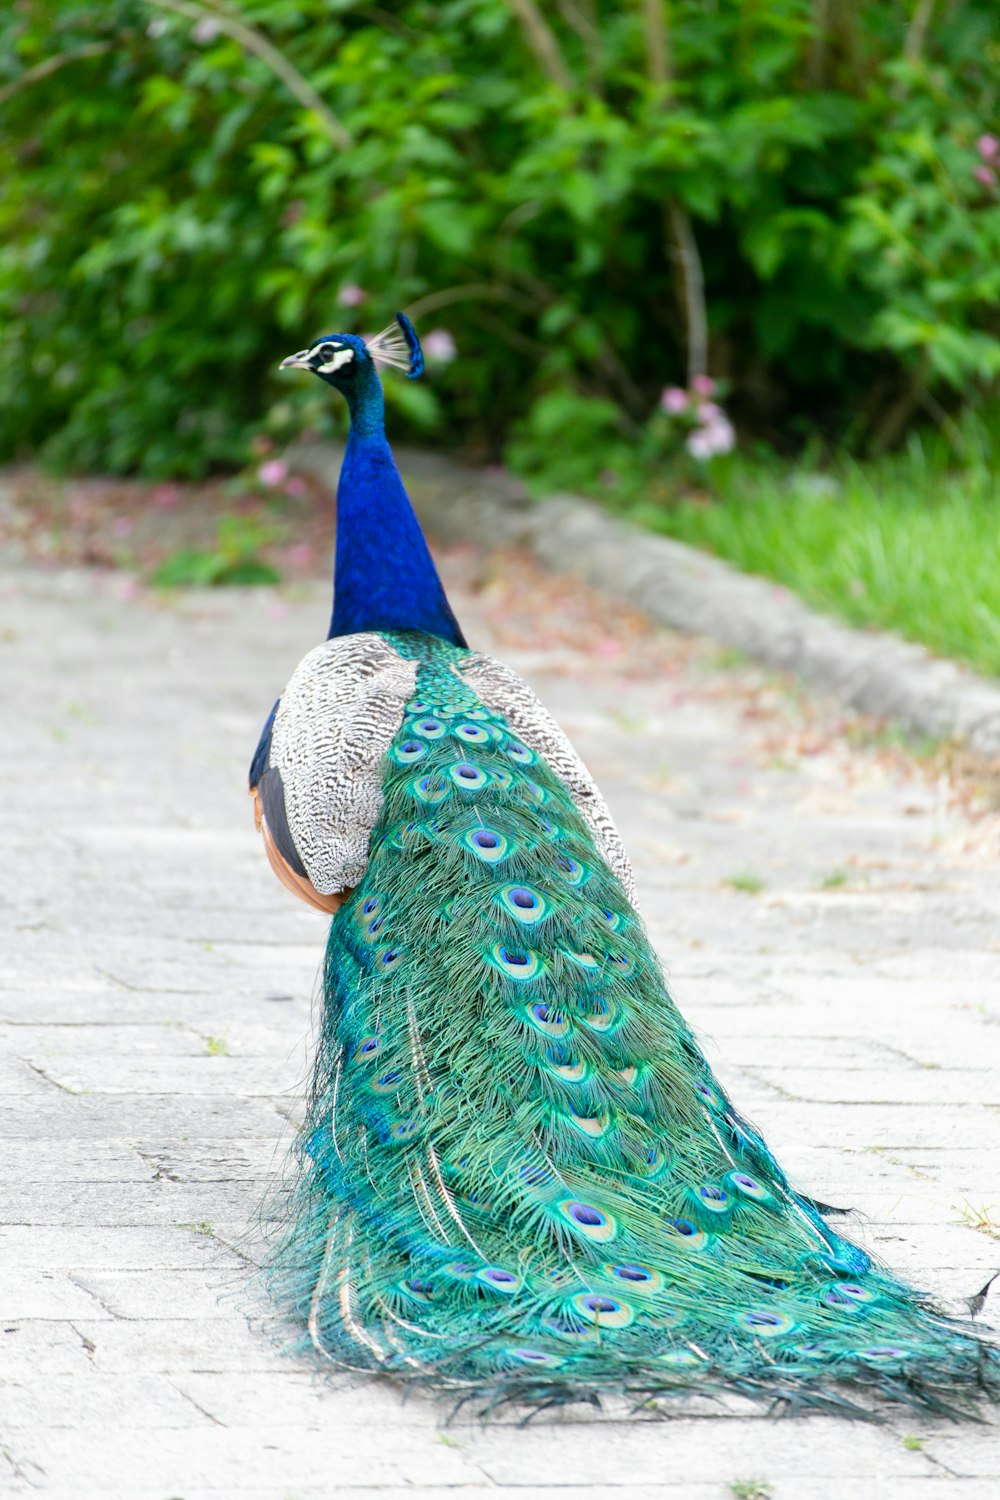 a peacock standing on a brick walkway next to a bush